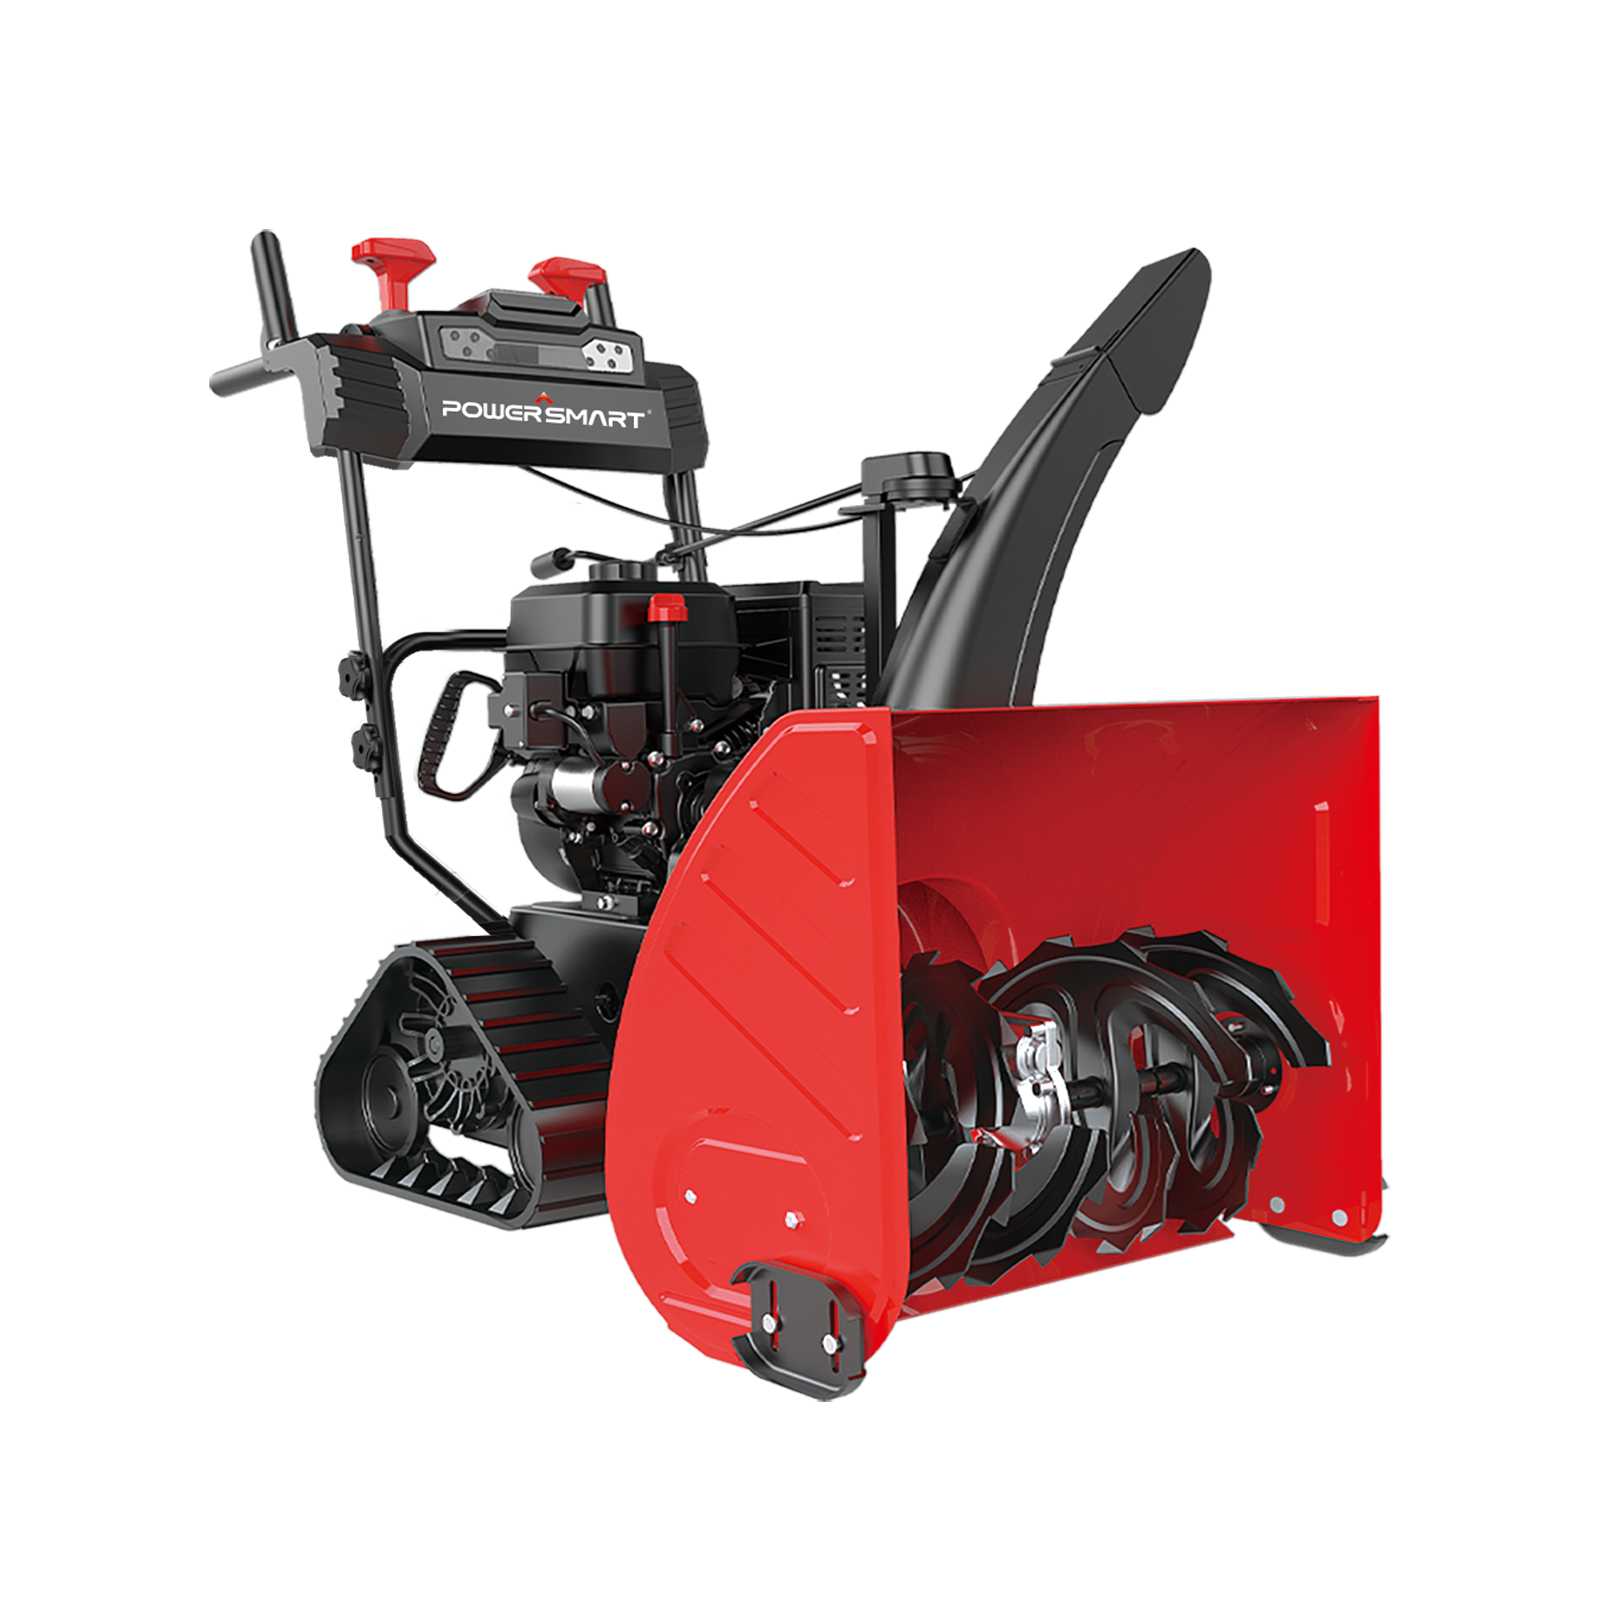 Gas- 26”Gasoline Two Stage Snow Blower 